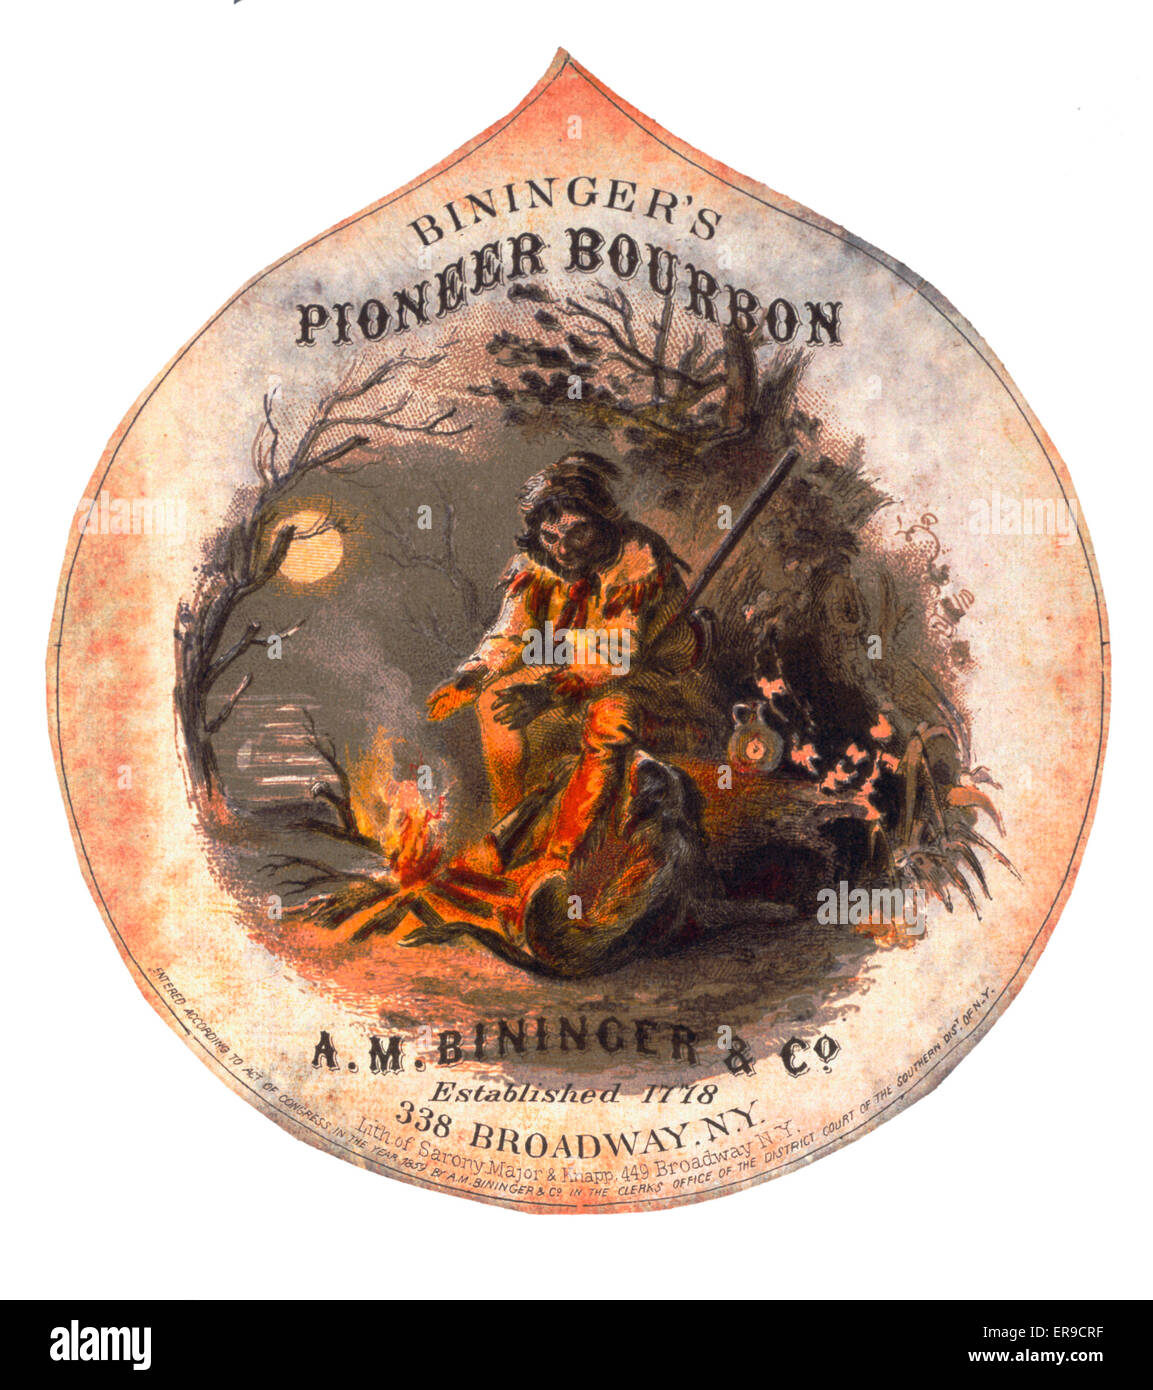 Bininger's Pioneer Bourbon, AM Bininger &amp; Co. Bourbon advertising label showing man holding rifle and warming his hands by campfire, with moon in background. Date c1859. Bininger's Pioneer Bourbon, AM Bininger &amp; Co. Bourbon advertising label showi Stock Photo